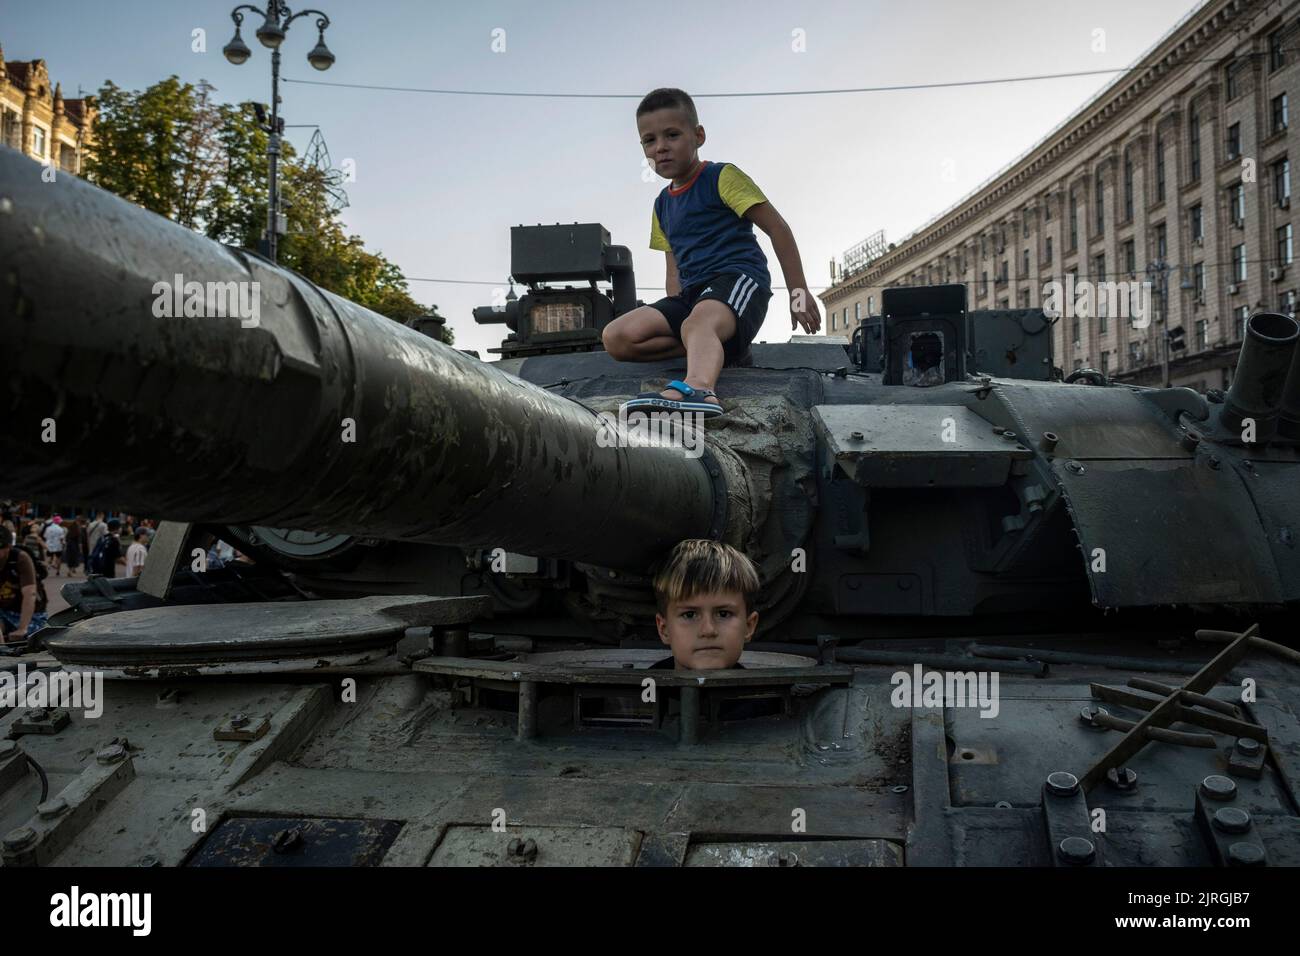 Kyiv, Kyiv Oblast, Ukraine. 21st Aug, 2022. Children climb and explore the display of a destroyed Russian tank turret on the streets of Kyiv. As dedicated to the upcoming Independence Day of Ukraine, and nearly 6 months after the full-scale invasion of Ukraine on February 24, the country's capital Kyiv holds an exhibition on the main street of Khreschaytk Street showing multiple destroyed military equipment, tanks and weapons from The Armed Forces of The Russian Federation (AFRF).As the Russian full invasion of Ukraine started on February 24, the war that has killed numerous civilians and so Stock Photo